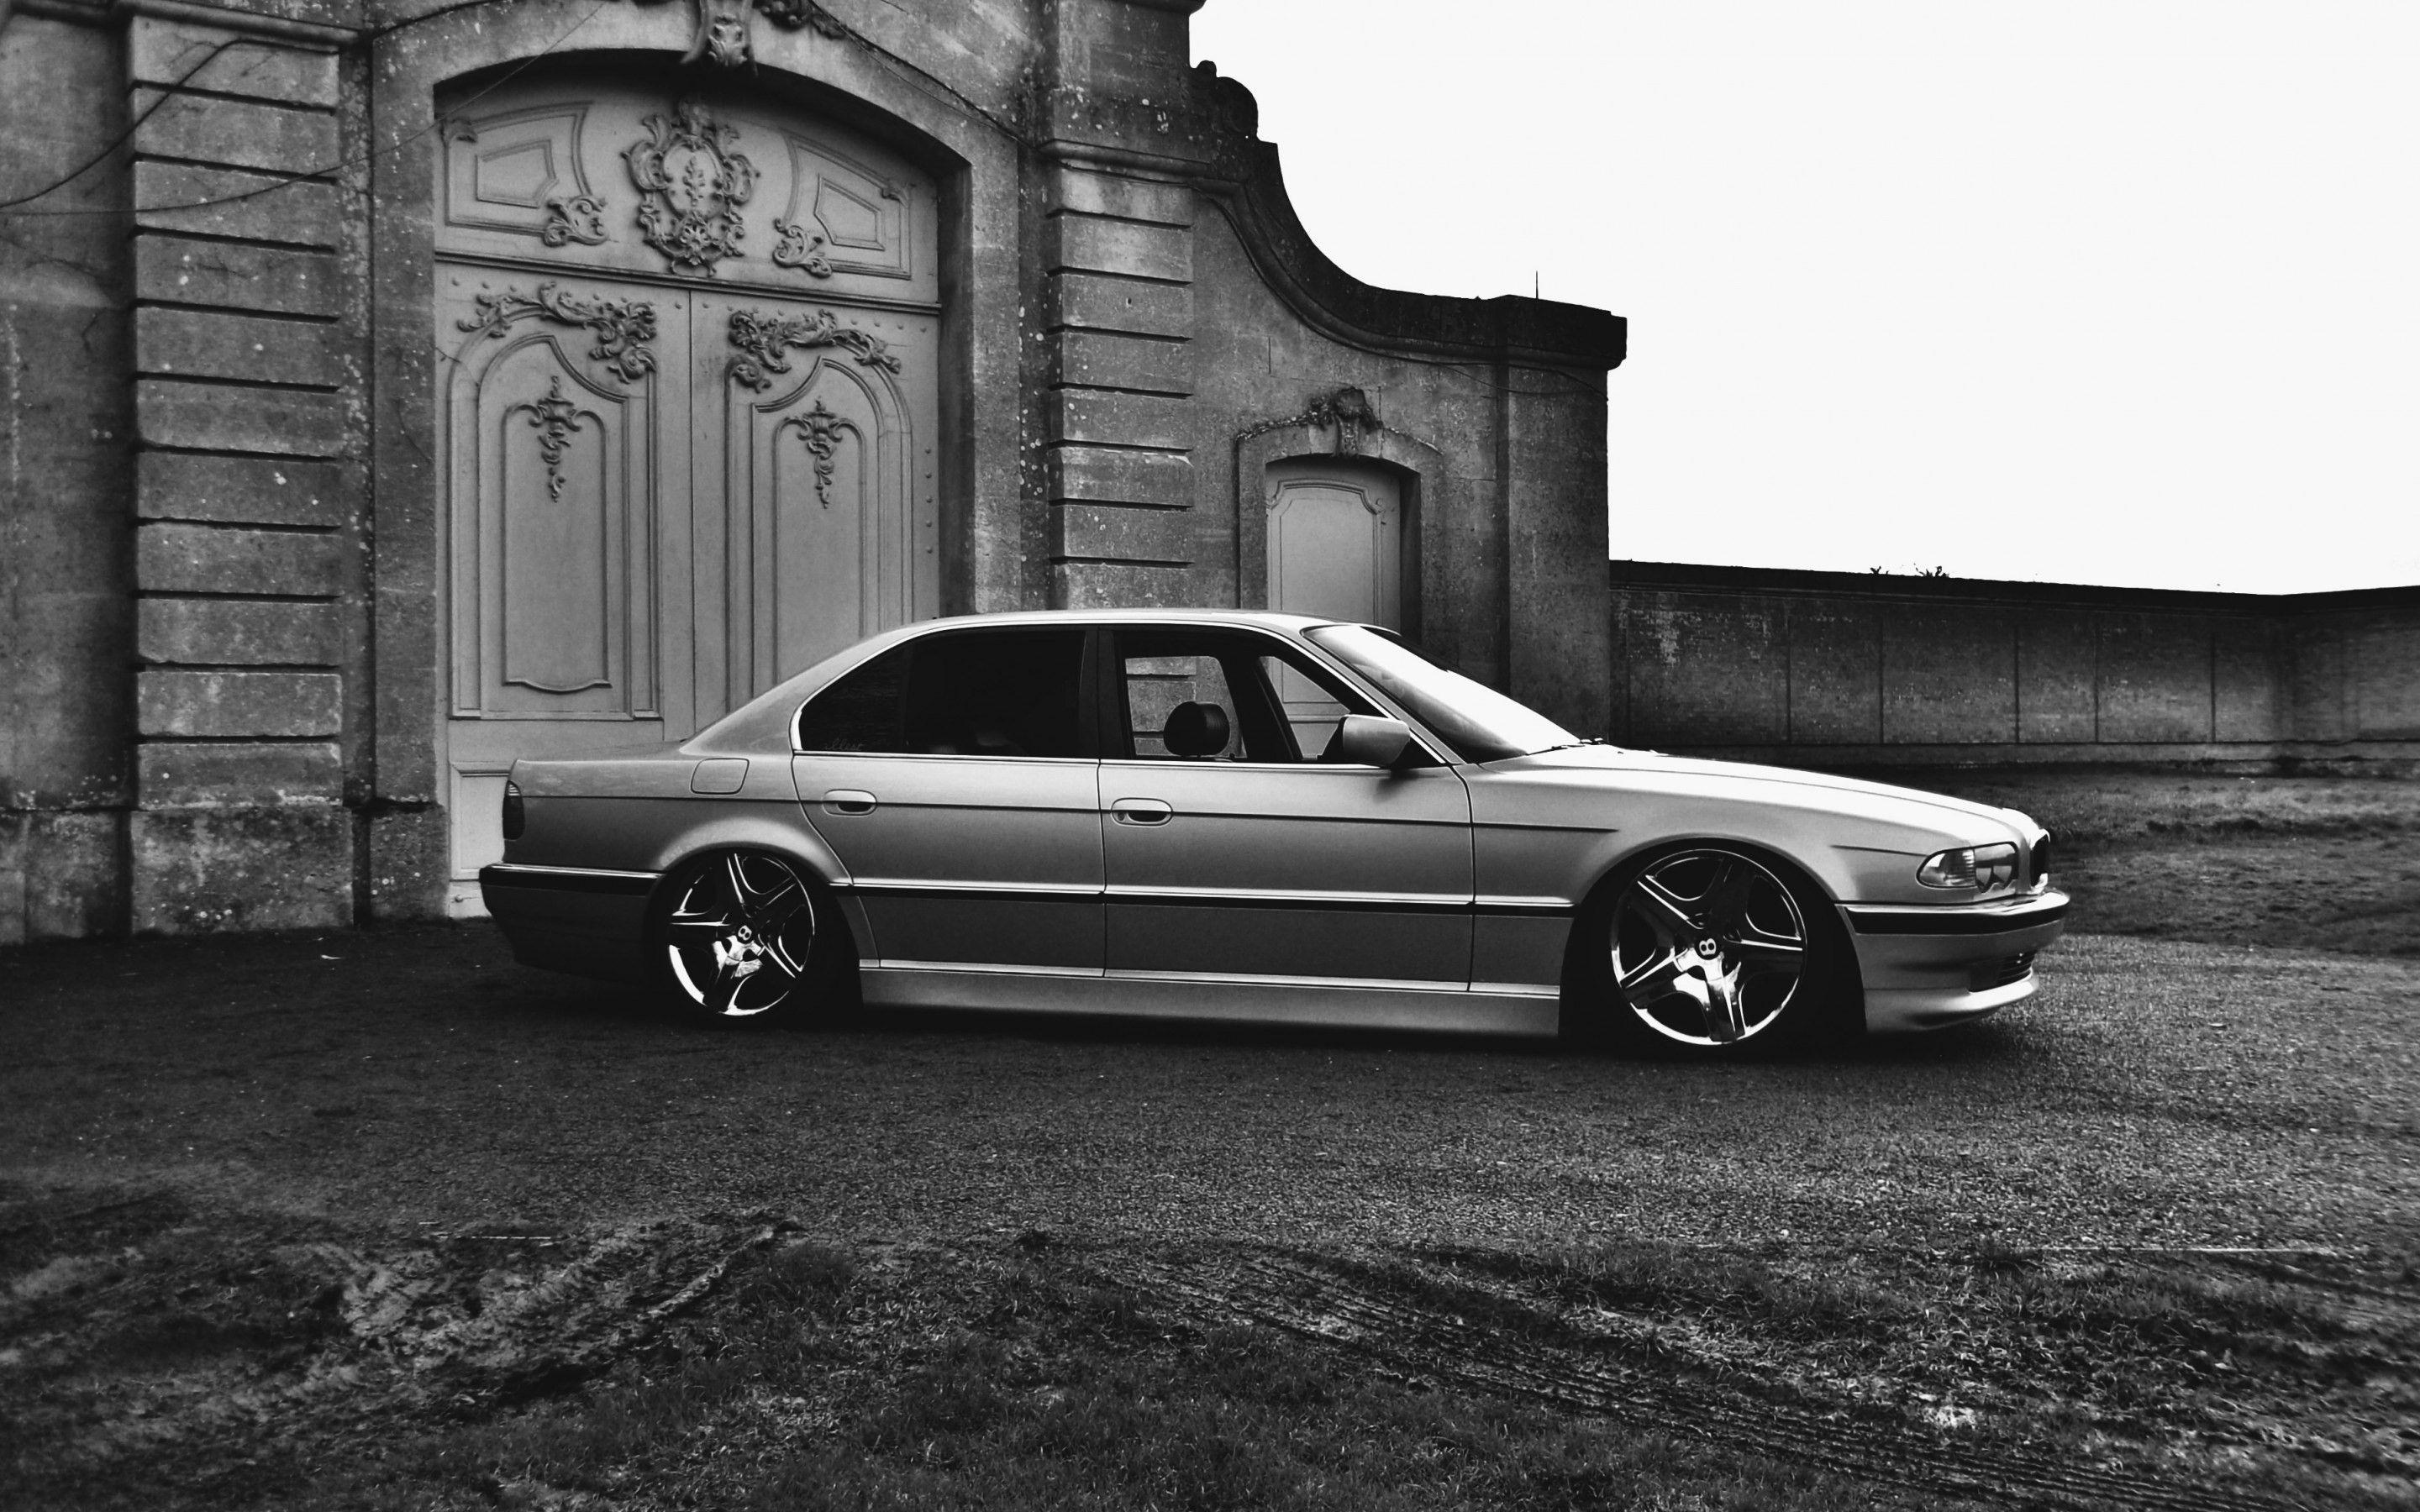 Wallpaper Bmw E38 750il Car Tuning HD Picture Image • OneDSLR